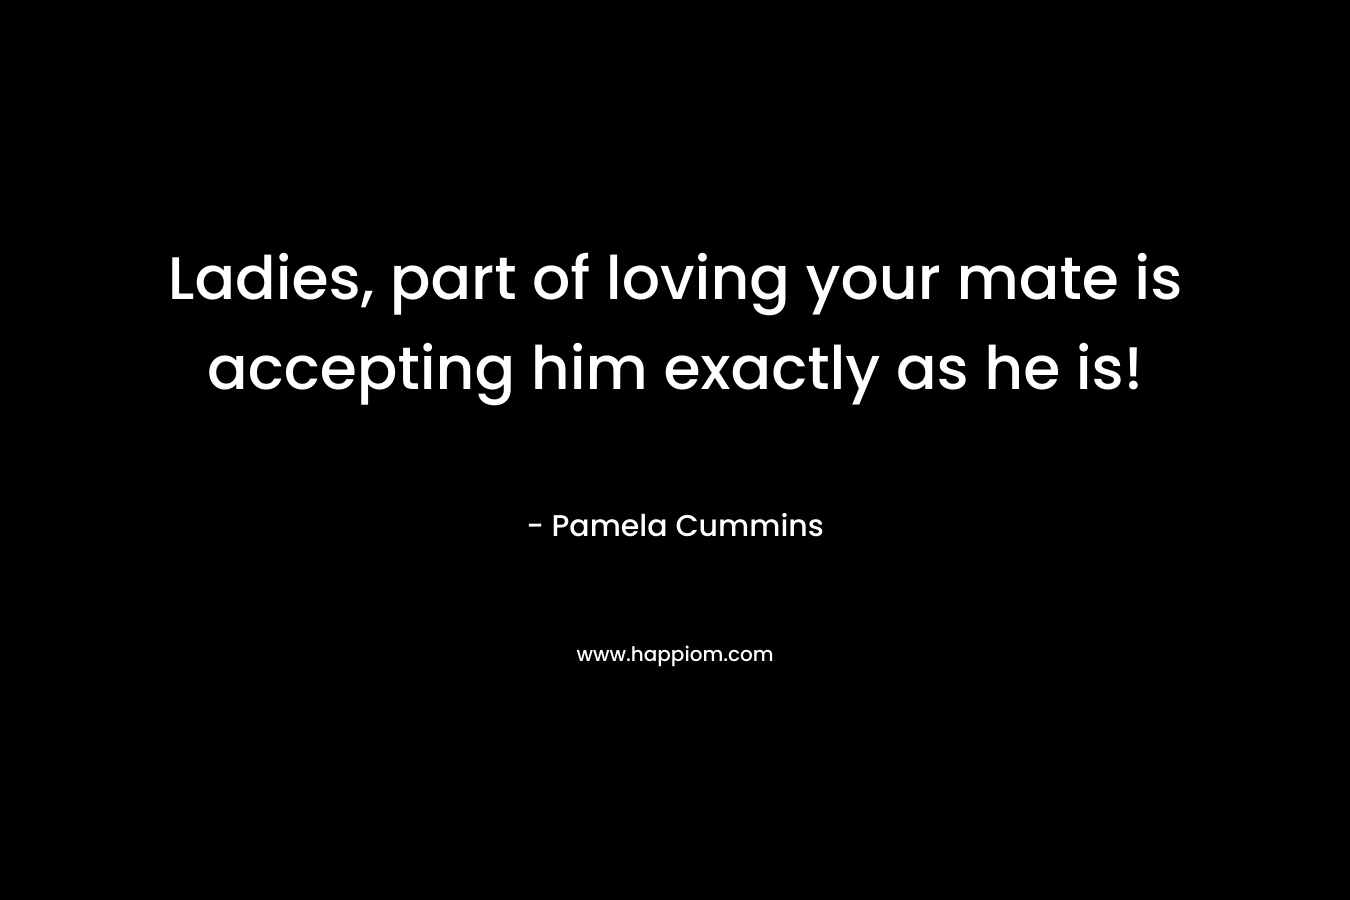 Ladies, part of loving your mate is accepting him exactly as he is! – Pamela Cummins